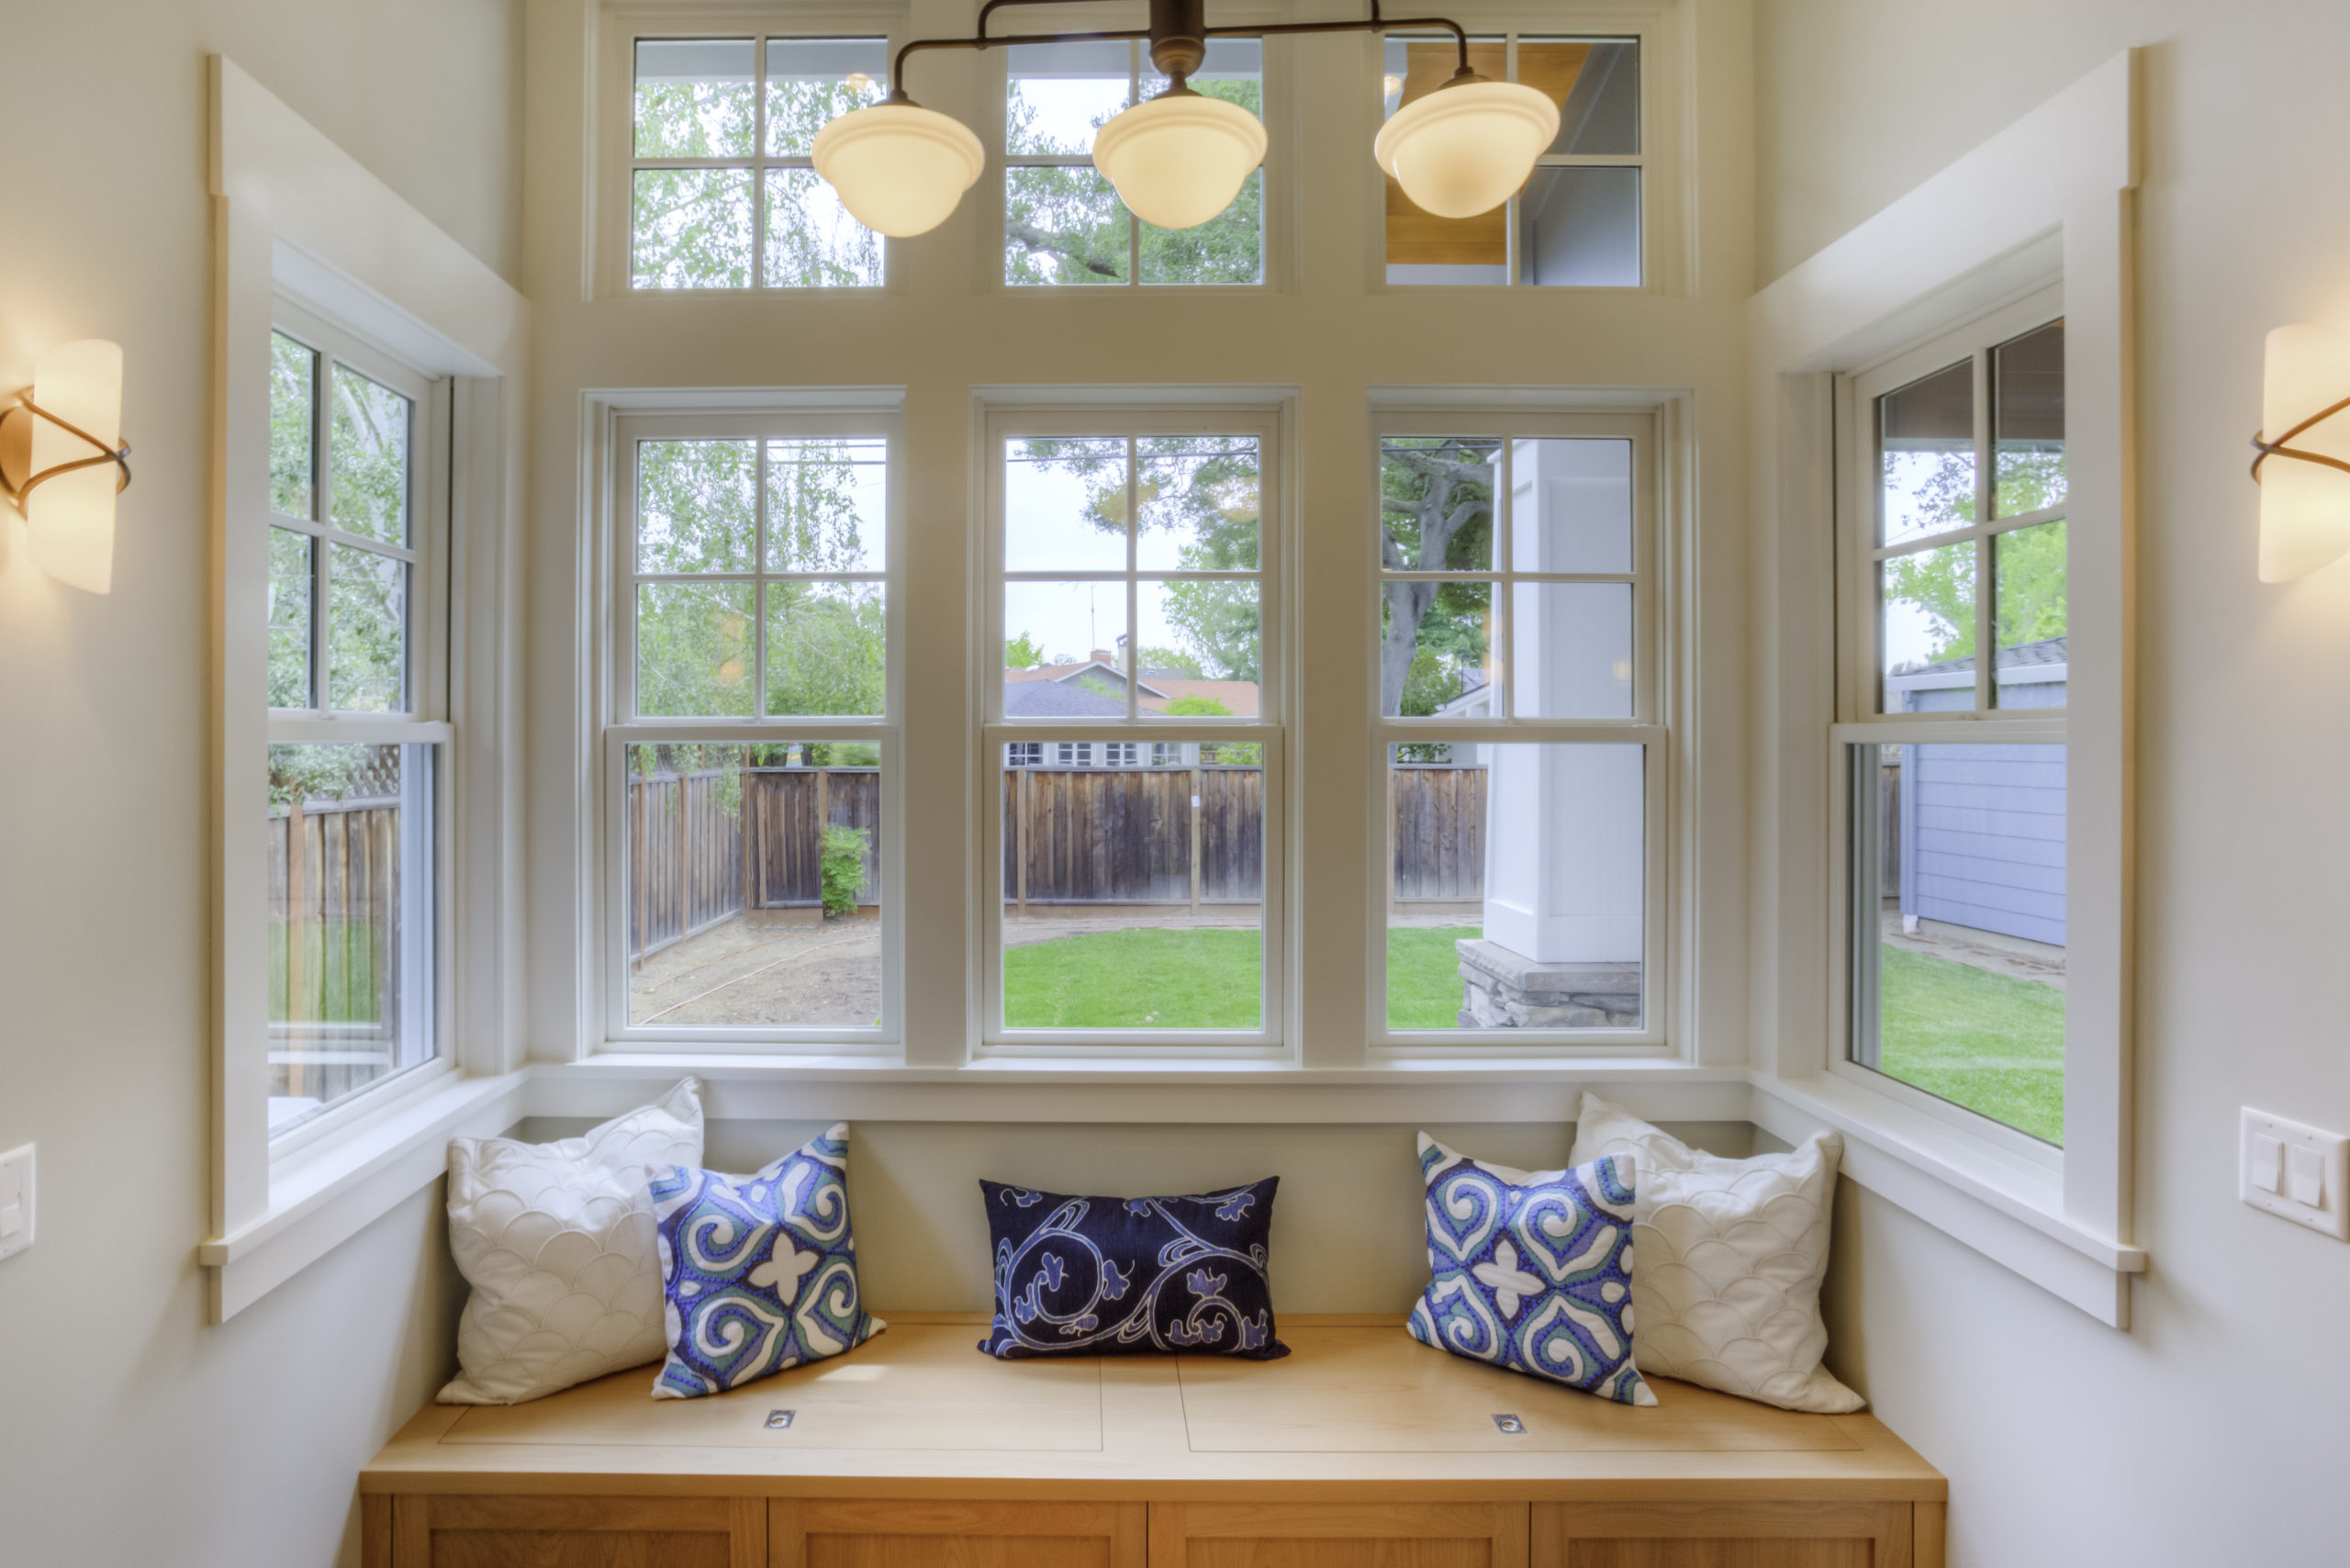 Remodel your living room space by adding custom glass and translucent shades to let in light and keep your privacy